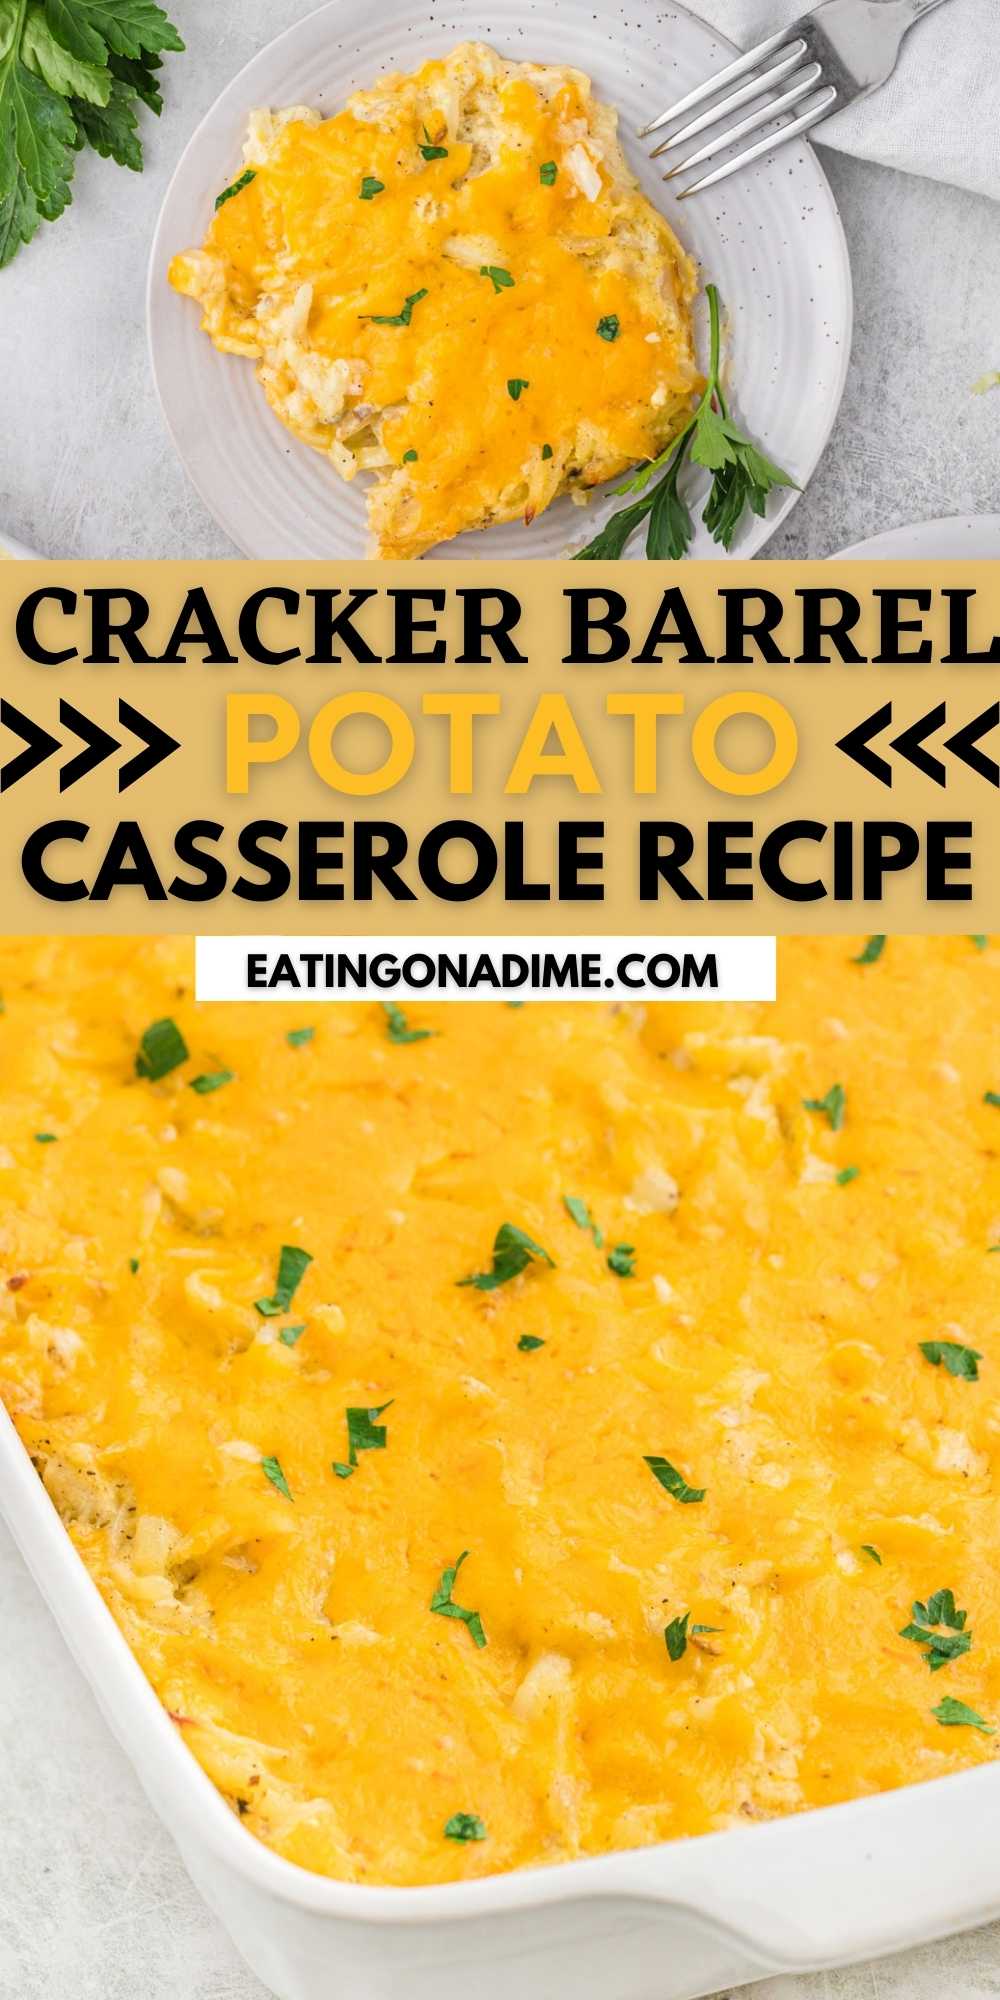 Cracker Barrel Potato Casserole is loaded with cheese and hashbrowns.  This copycat recipe is creamy, delicious and easy to make with simple ingredients. #eatingonadime #copycatrecipes #potatocasserole